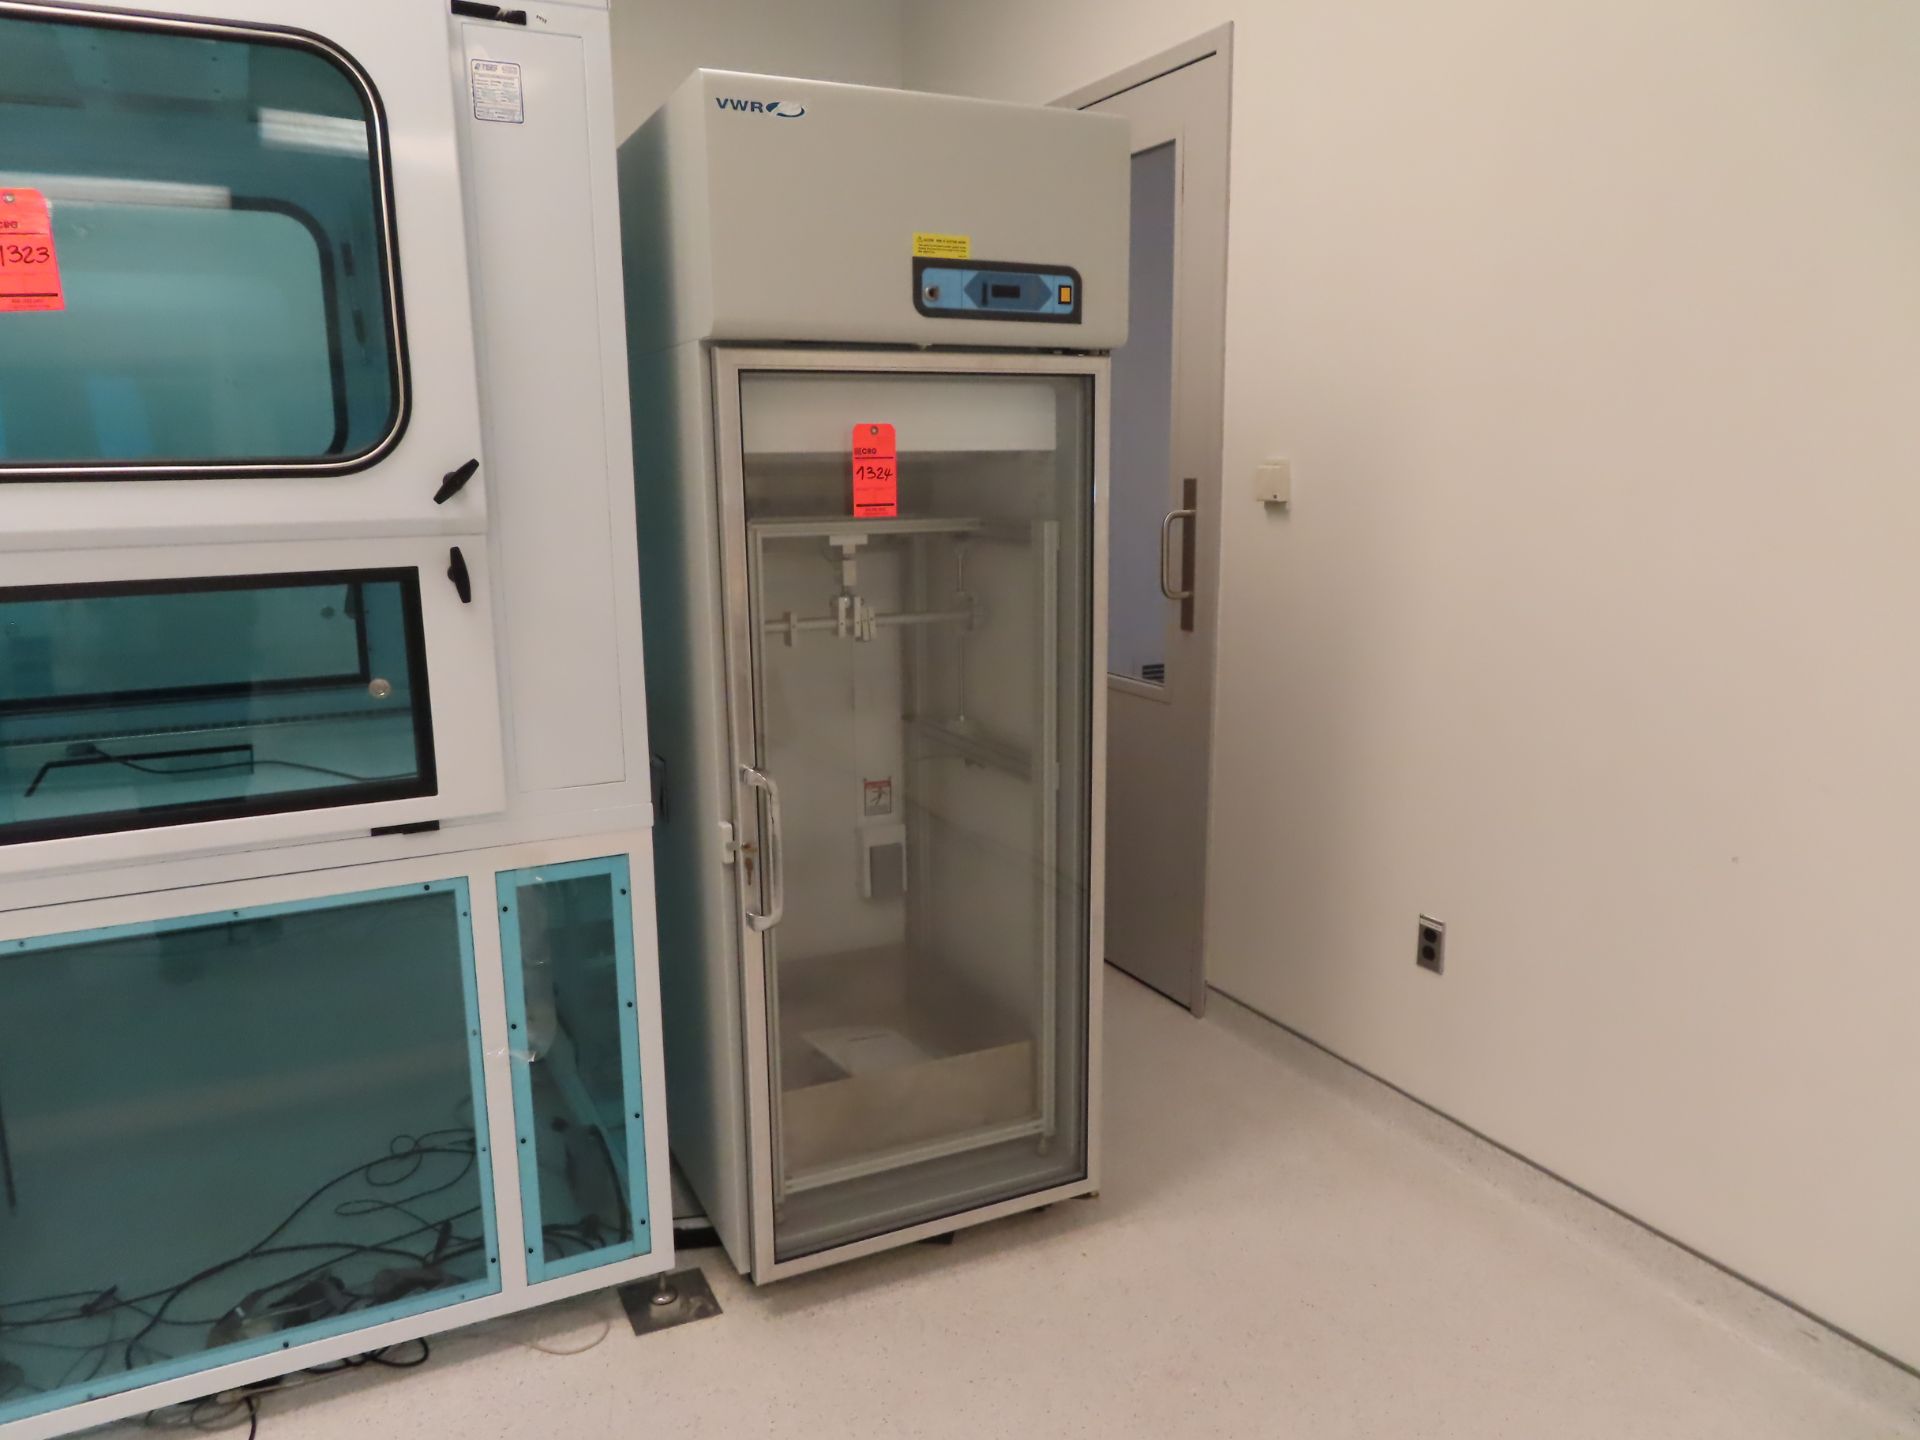 VWR chromatography refrigerator, VCR2304A22, located in building 5, 3rd floor, room F384